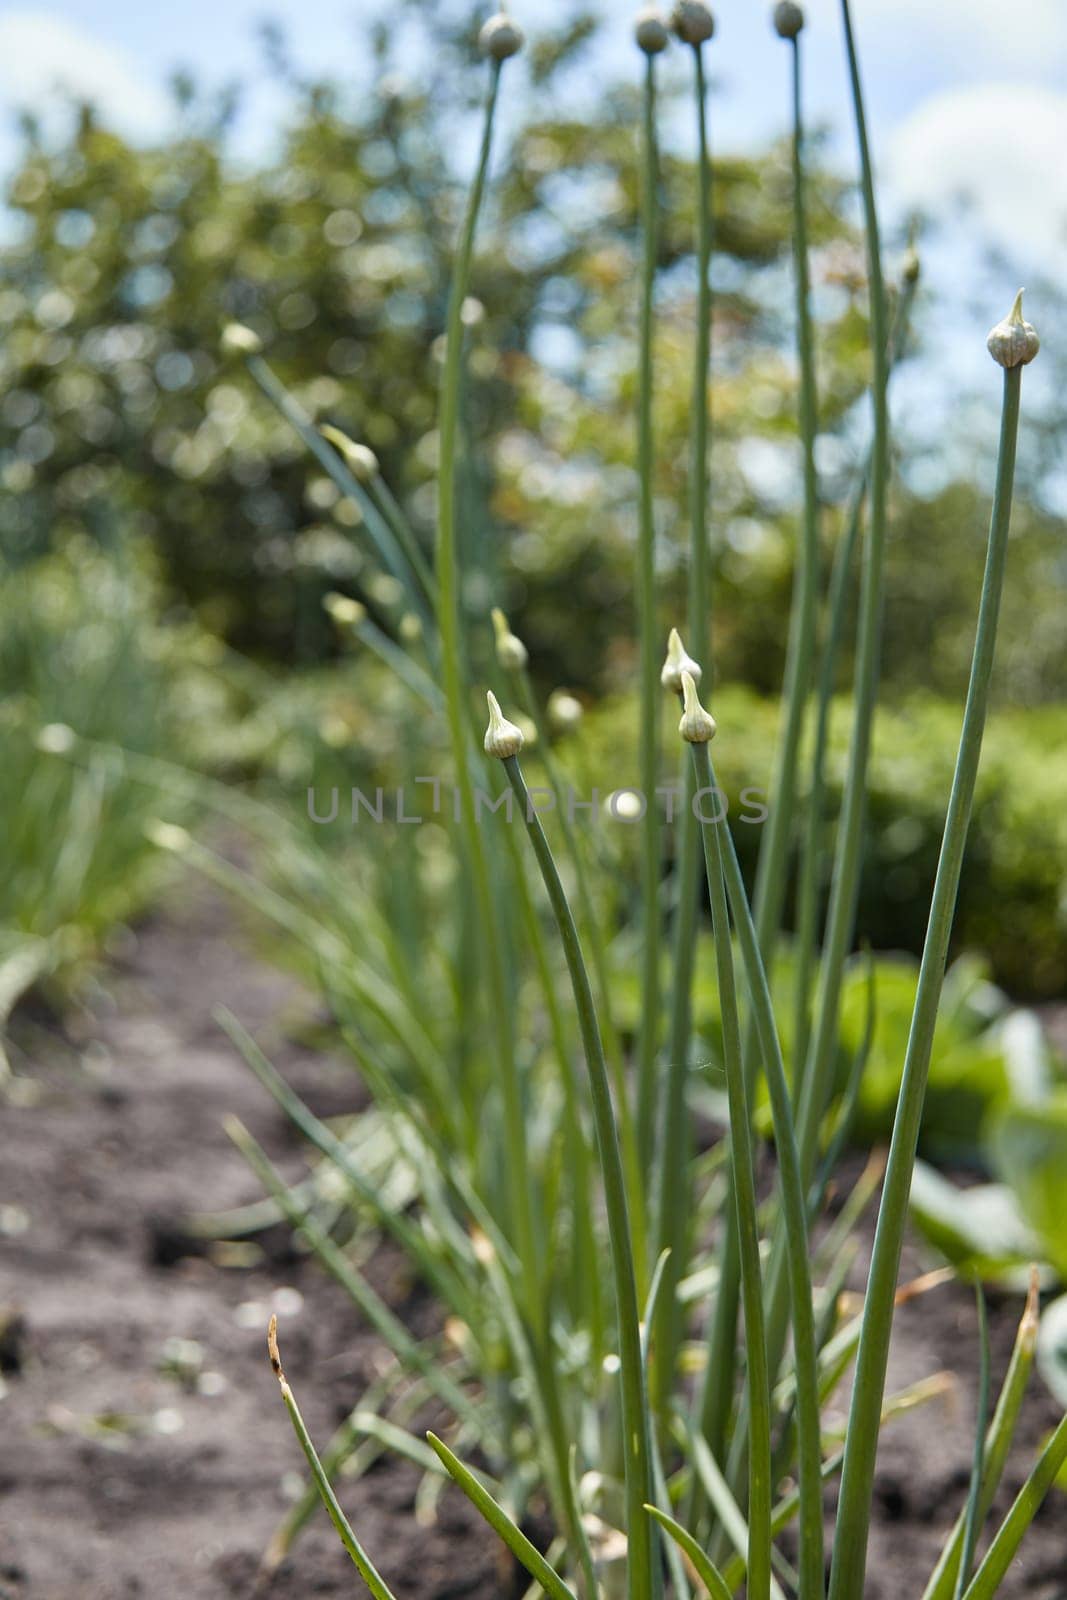 Organically grown onions with bud on a stalk of plant